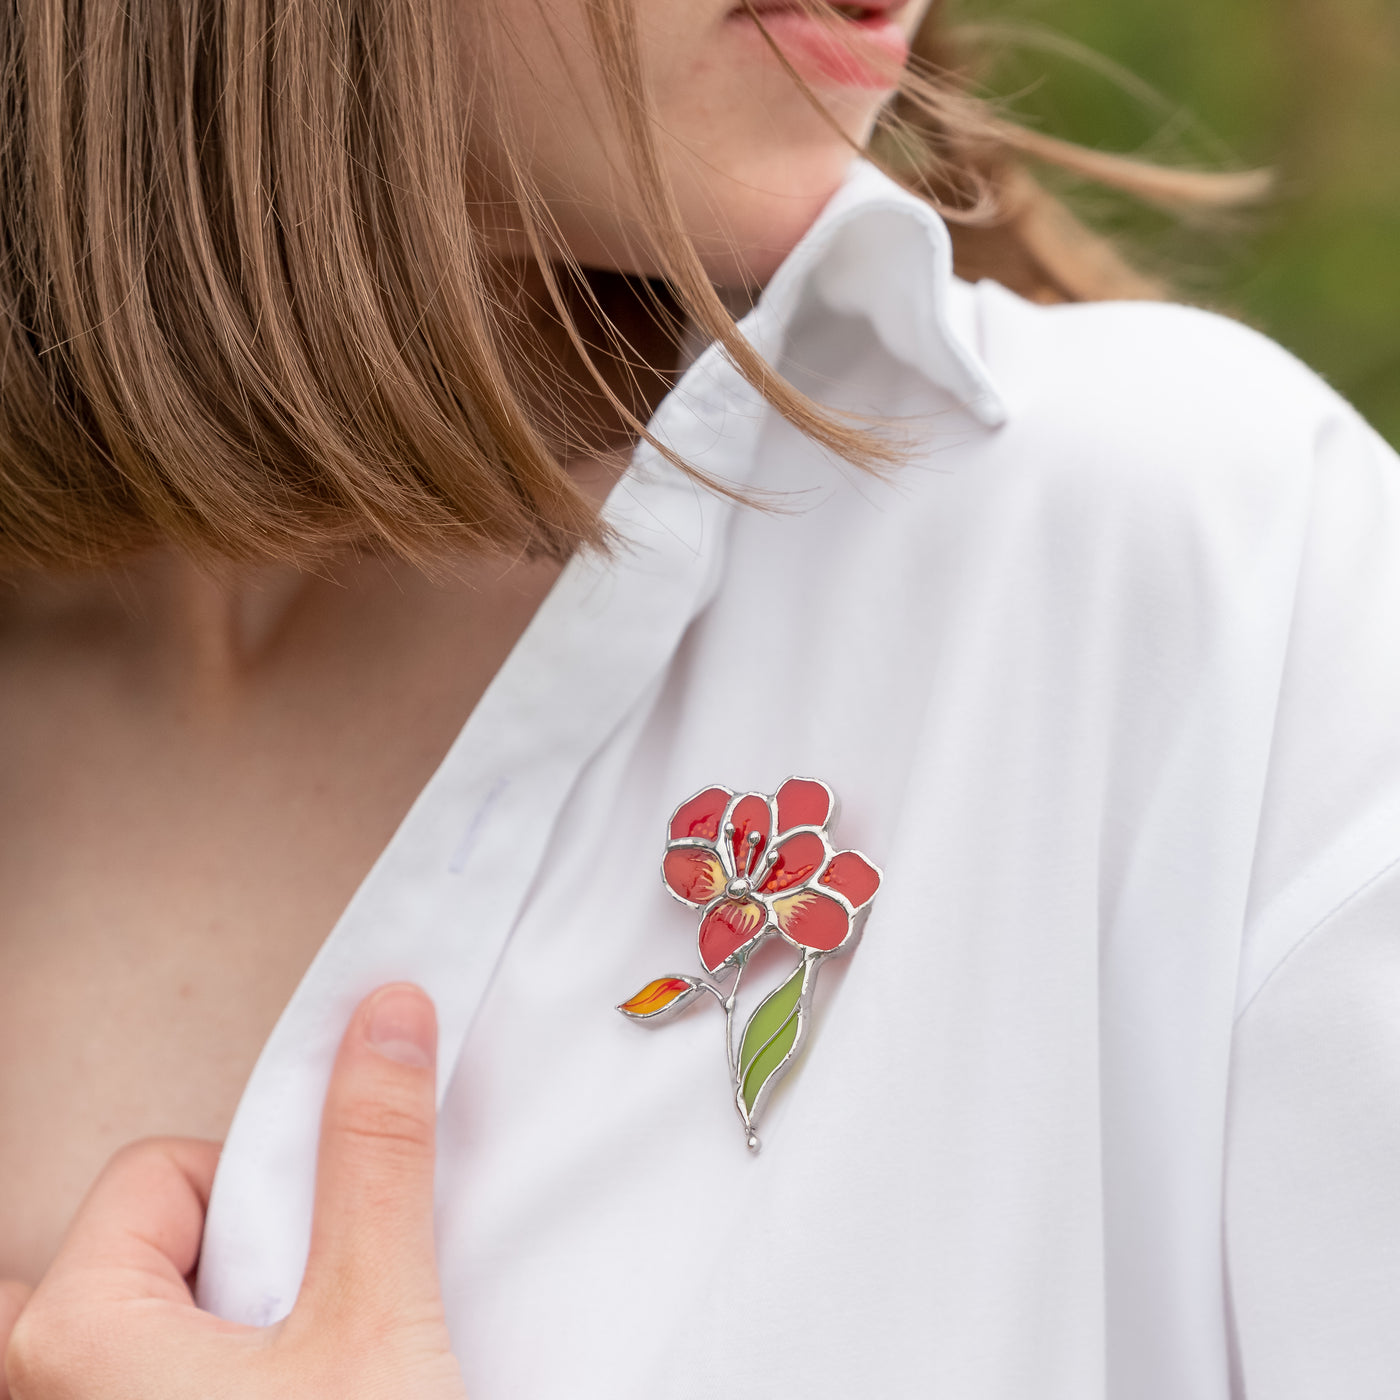 Red aster stained glass brooch on a white shirt